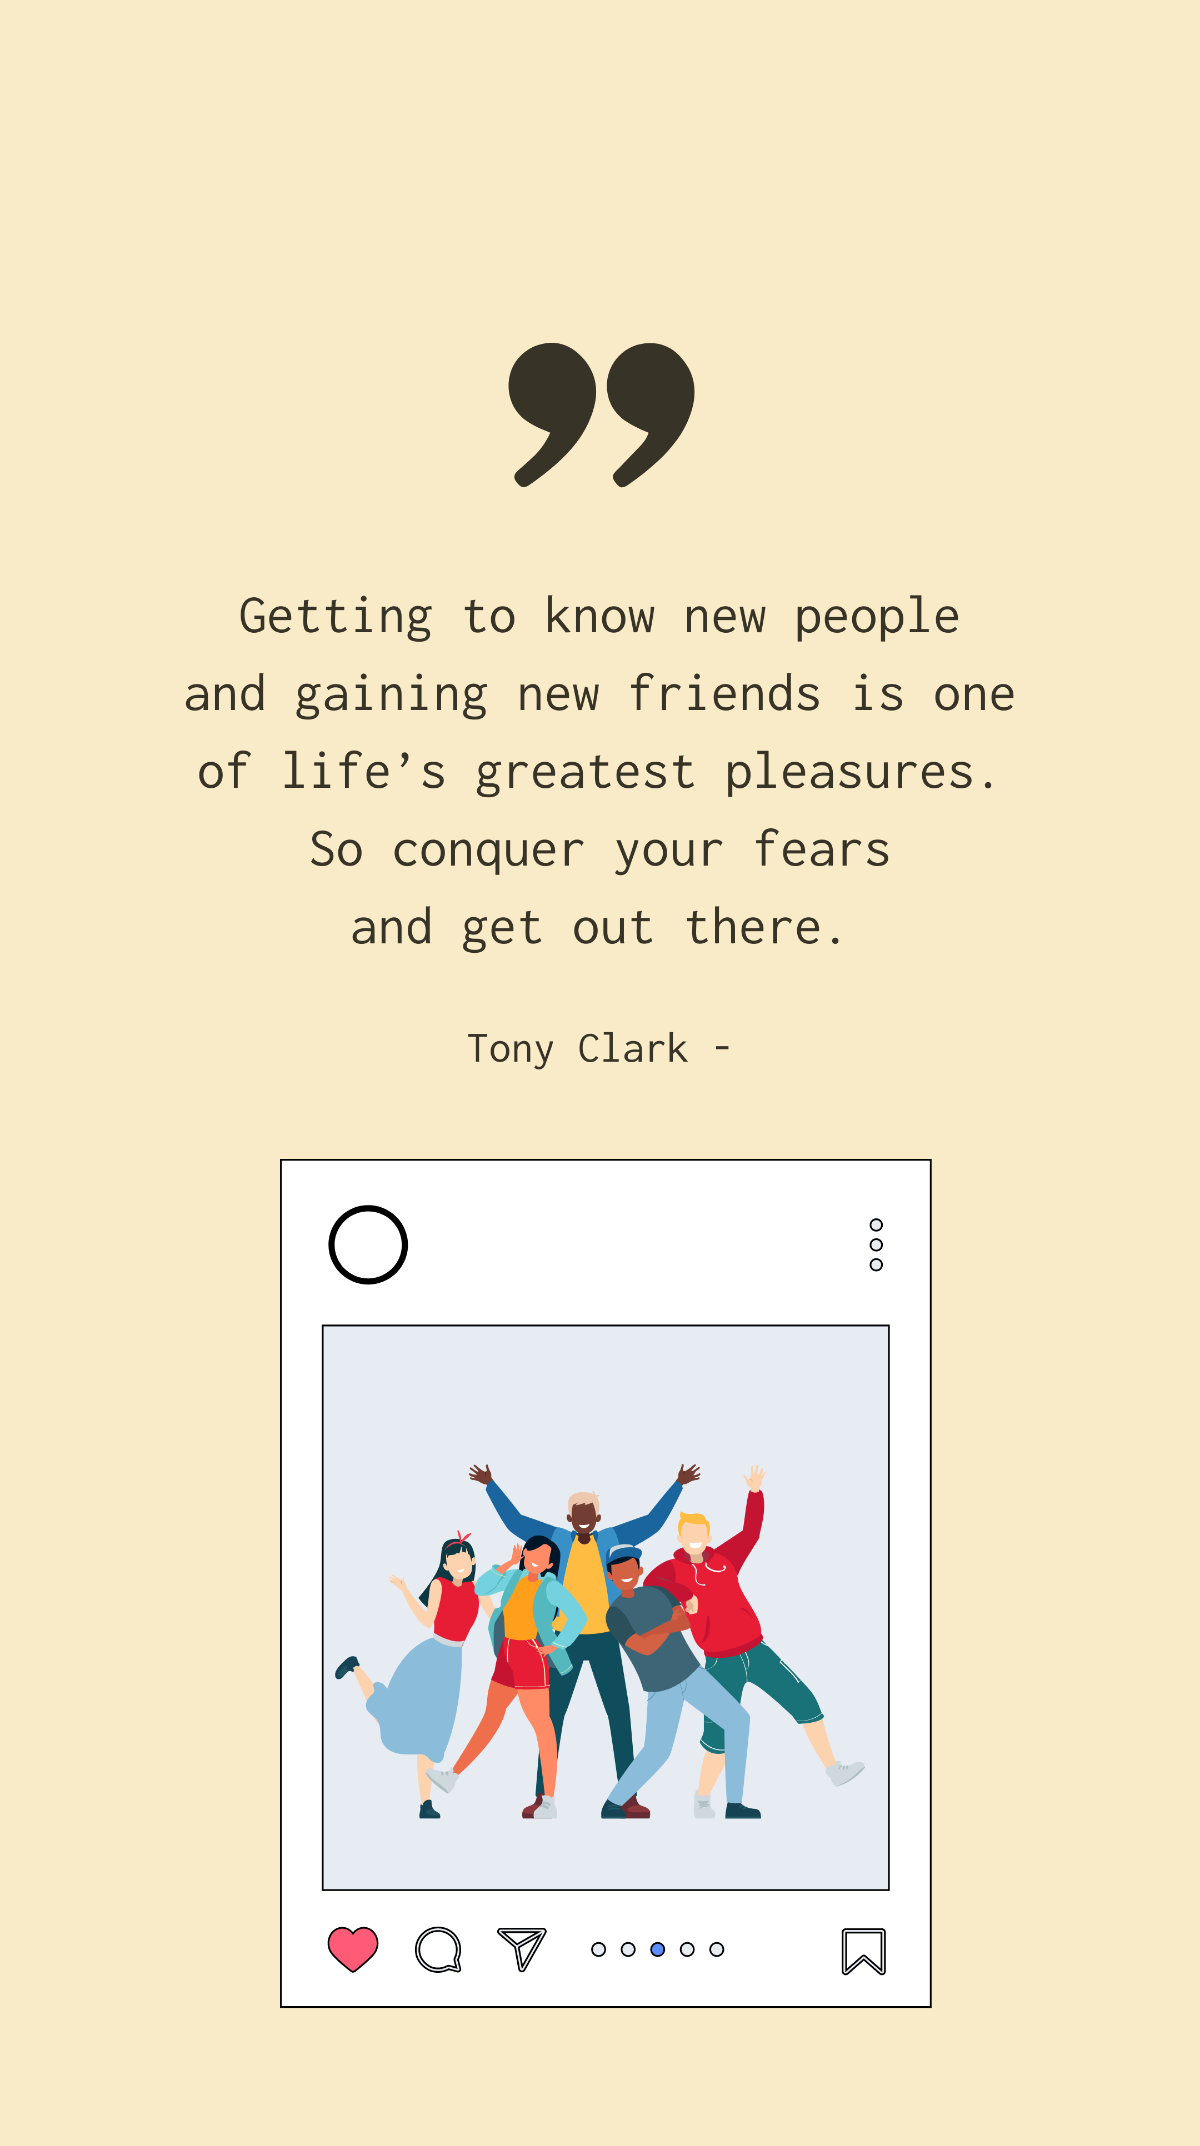 Tony Clark - Getting to know new people and gaining new friends is one of life’s greatest pleasures. So conquer your fears and get out there. Template